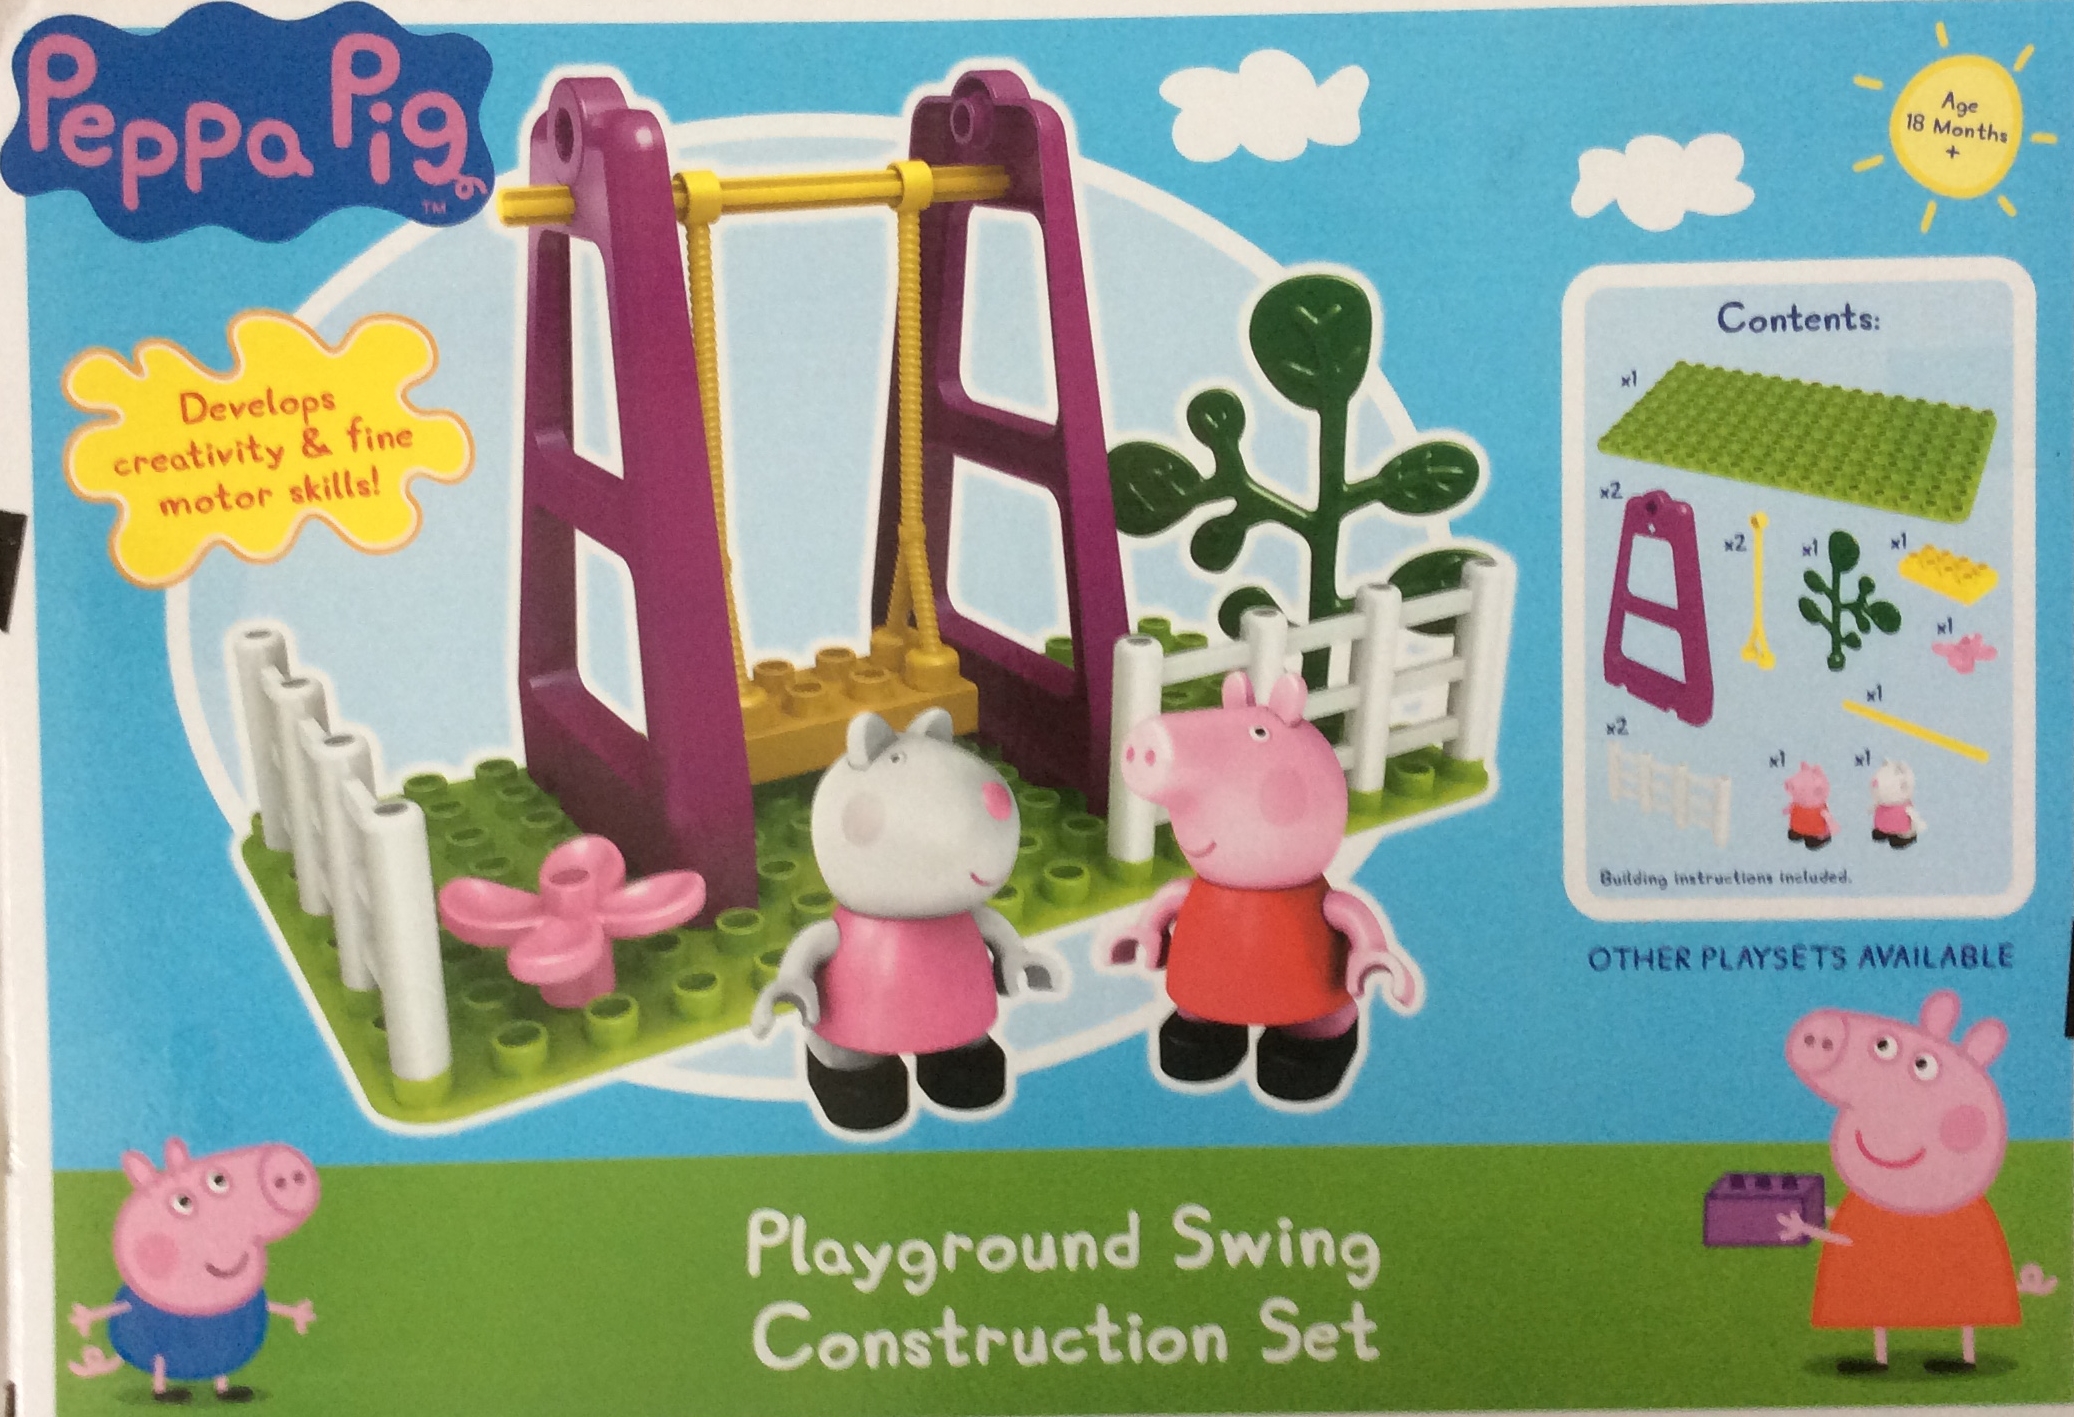 Peppa Pig Playground Swing Construction Set  – Review